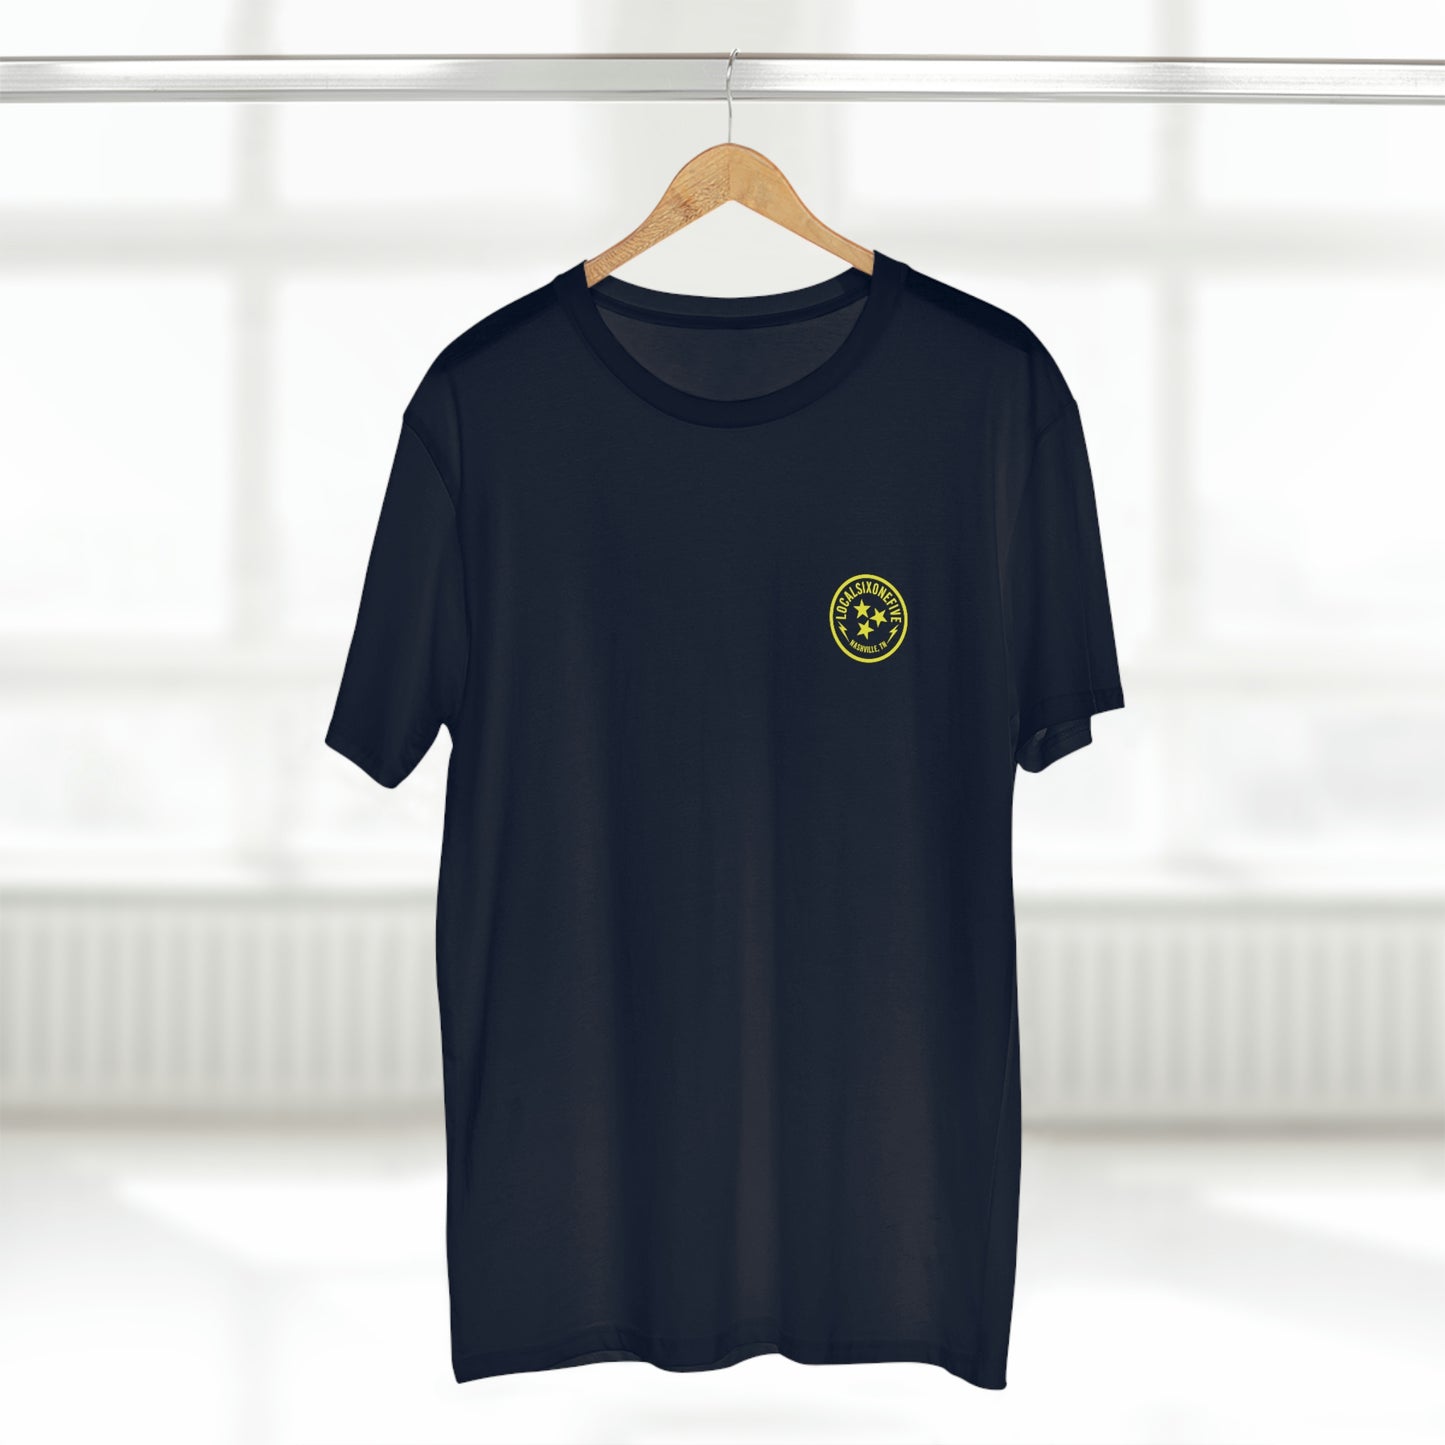 Local Southern Hospitality Soccer Men's Staple Tee